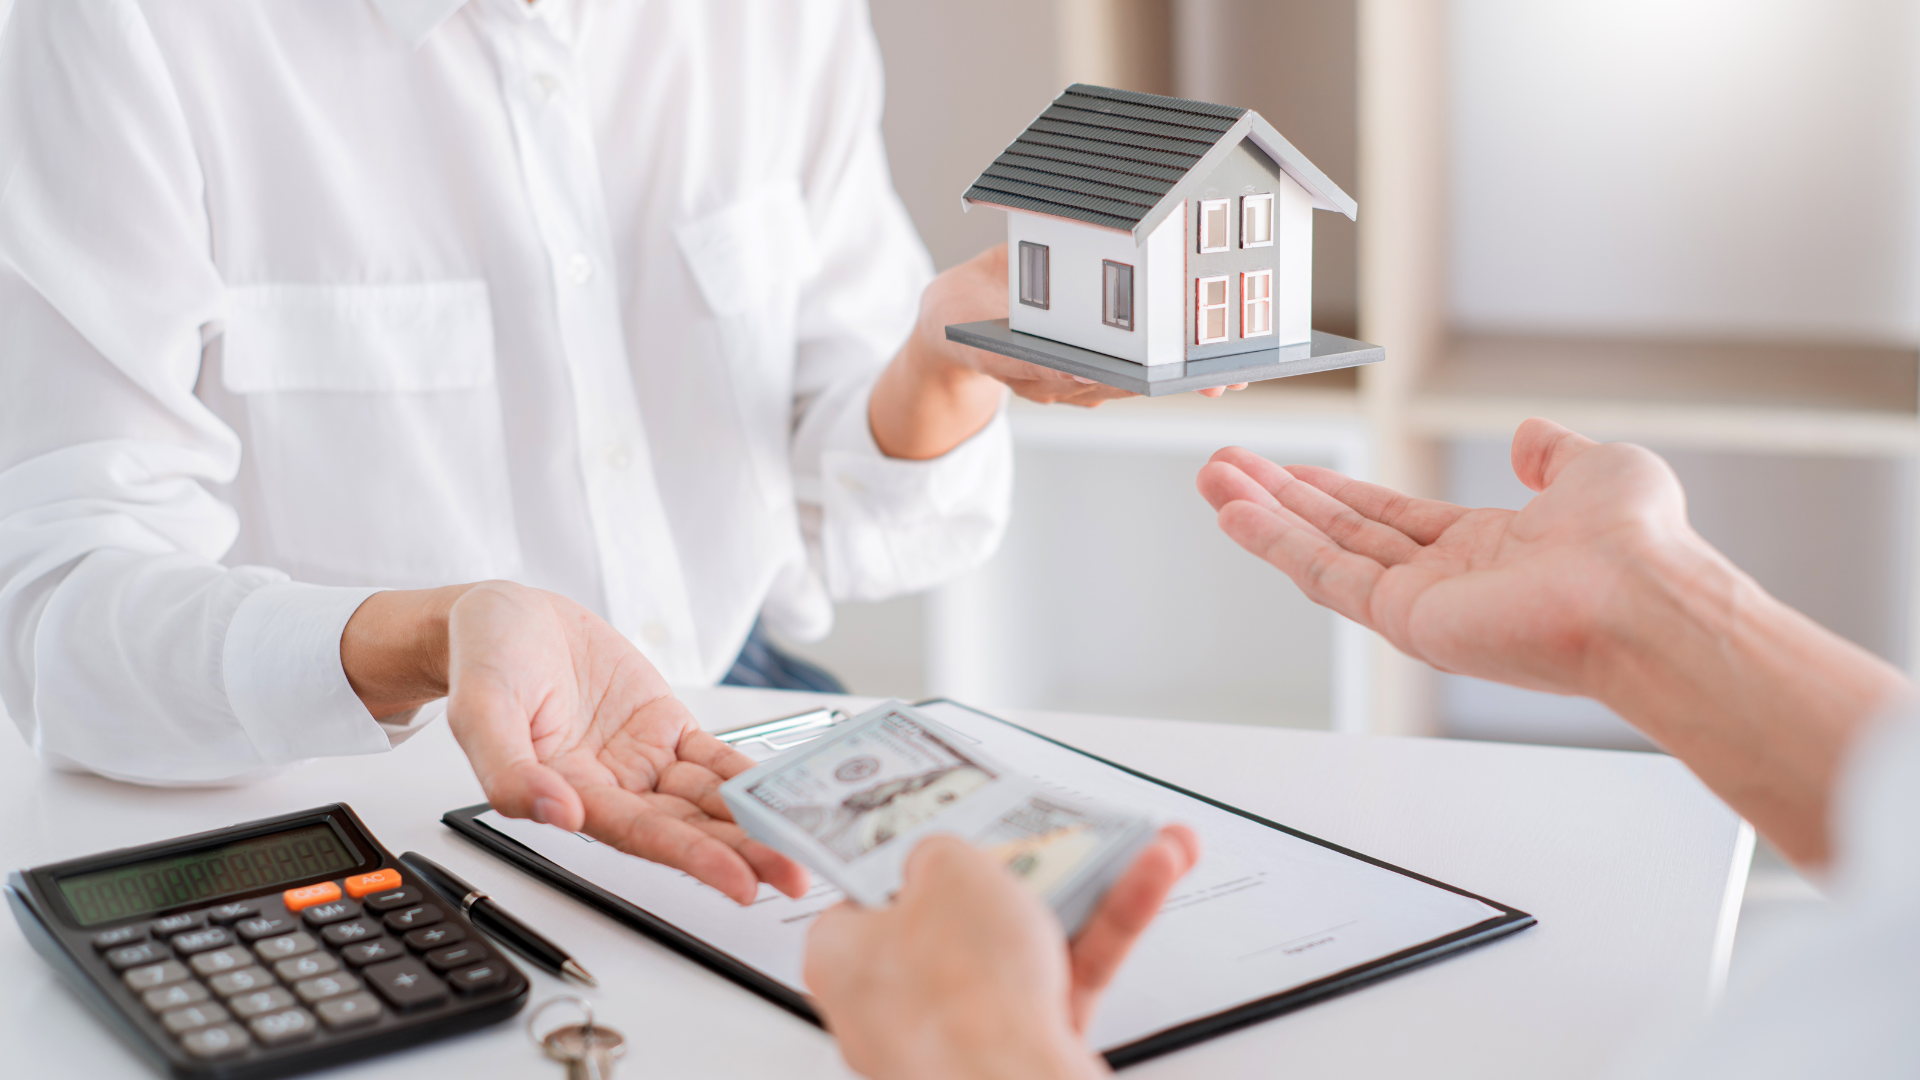 exchanging money for real estate